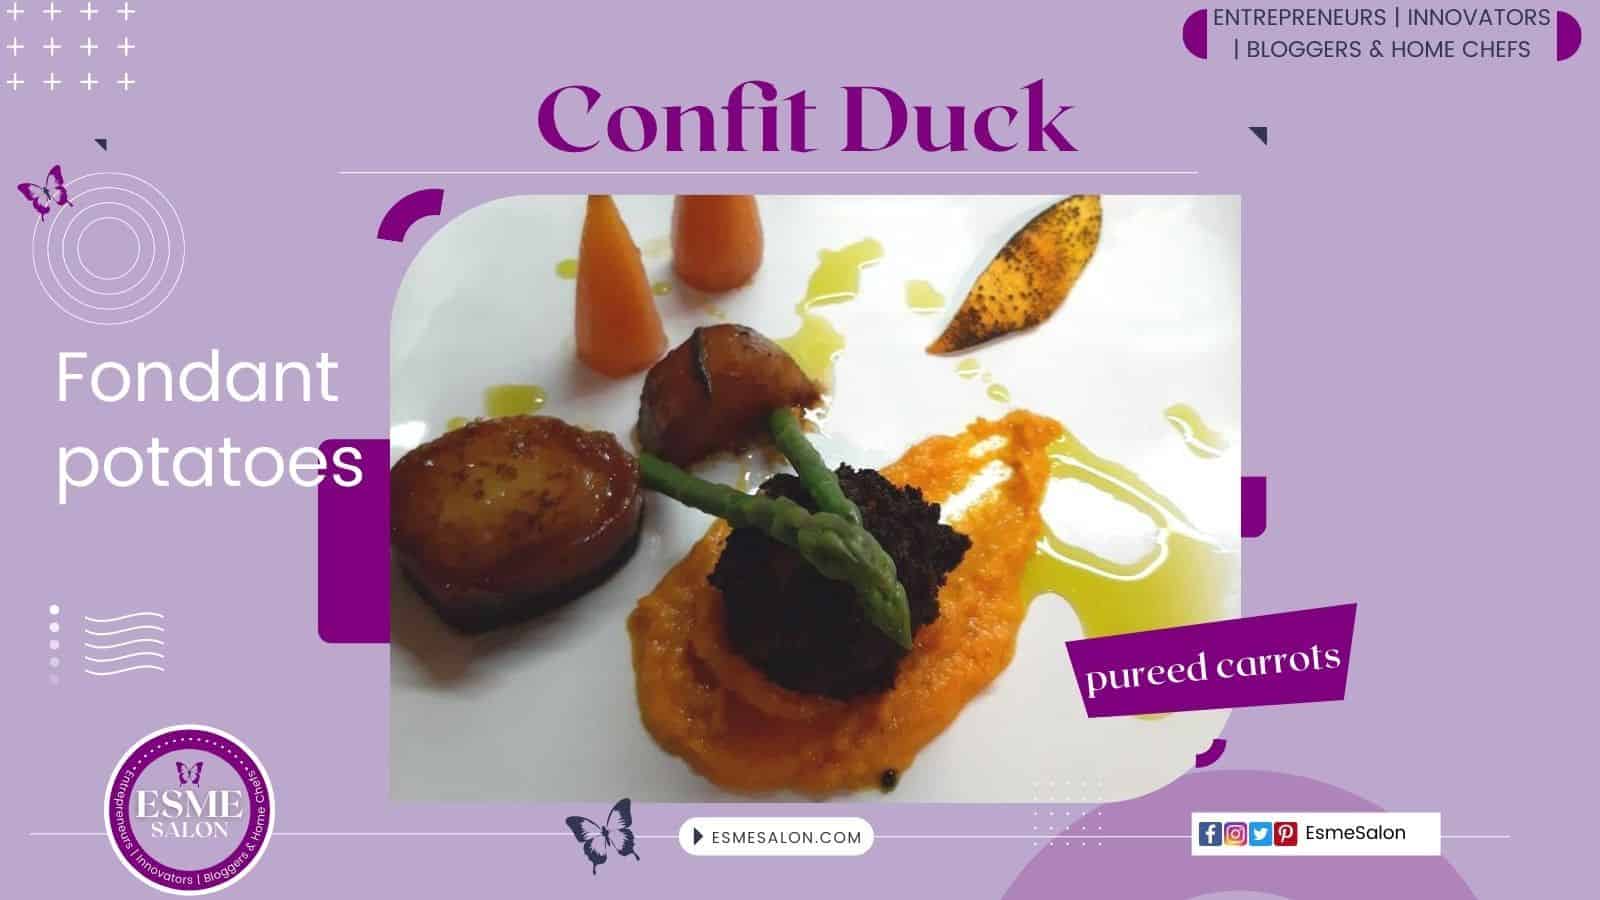 Confit Duck with fondant potatoes and pureed carrots